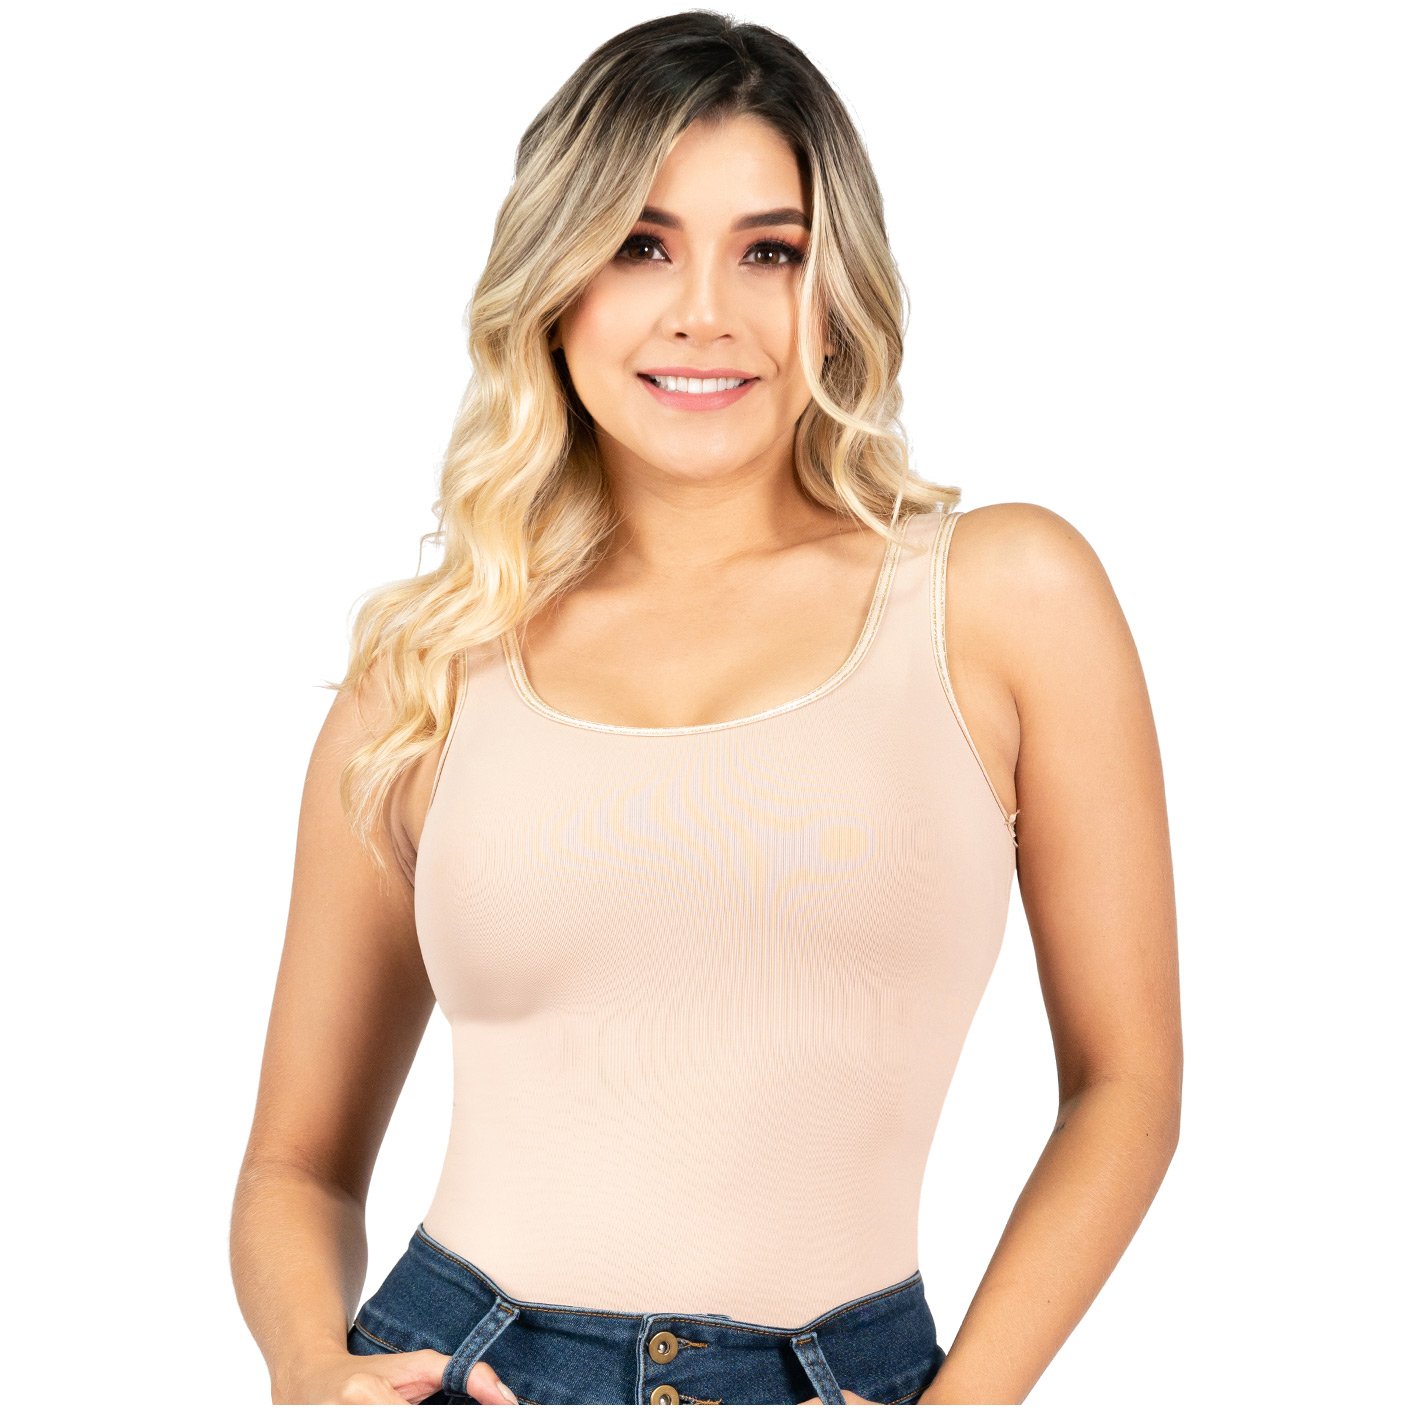 Sonryse 001 | One Piece Tank Top Compression External Body for Women - fajacolombian